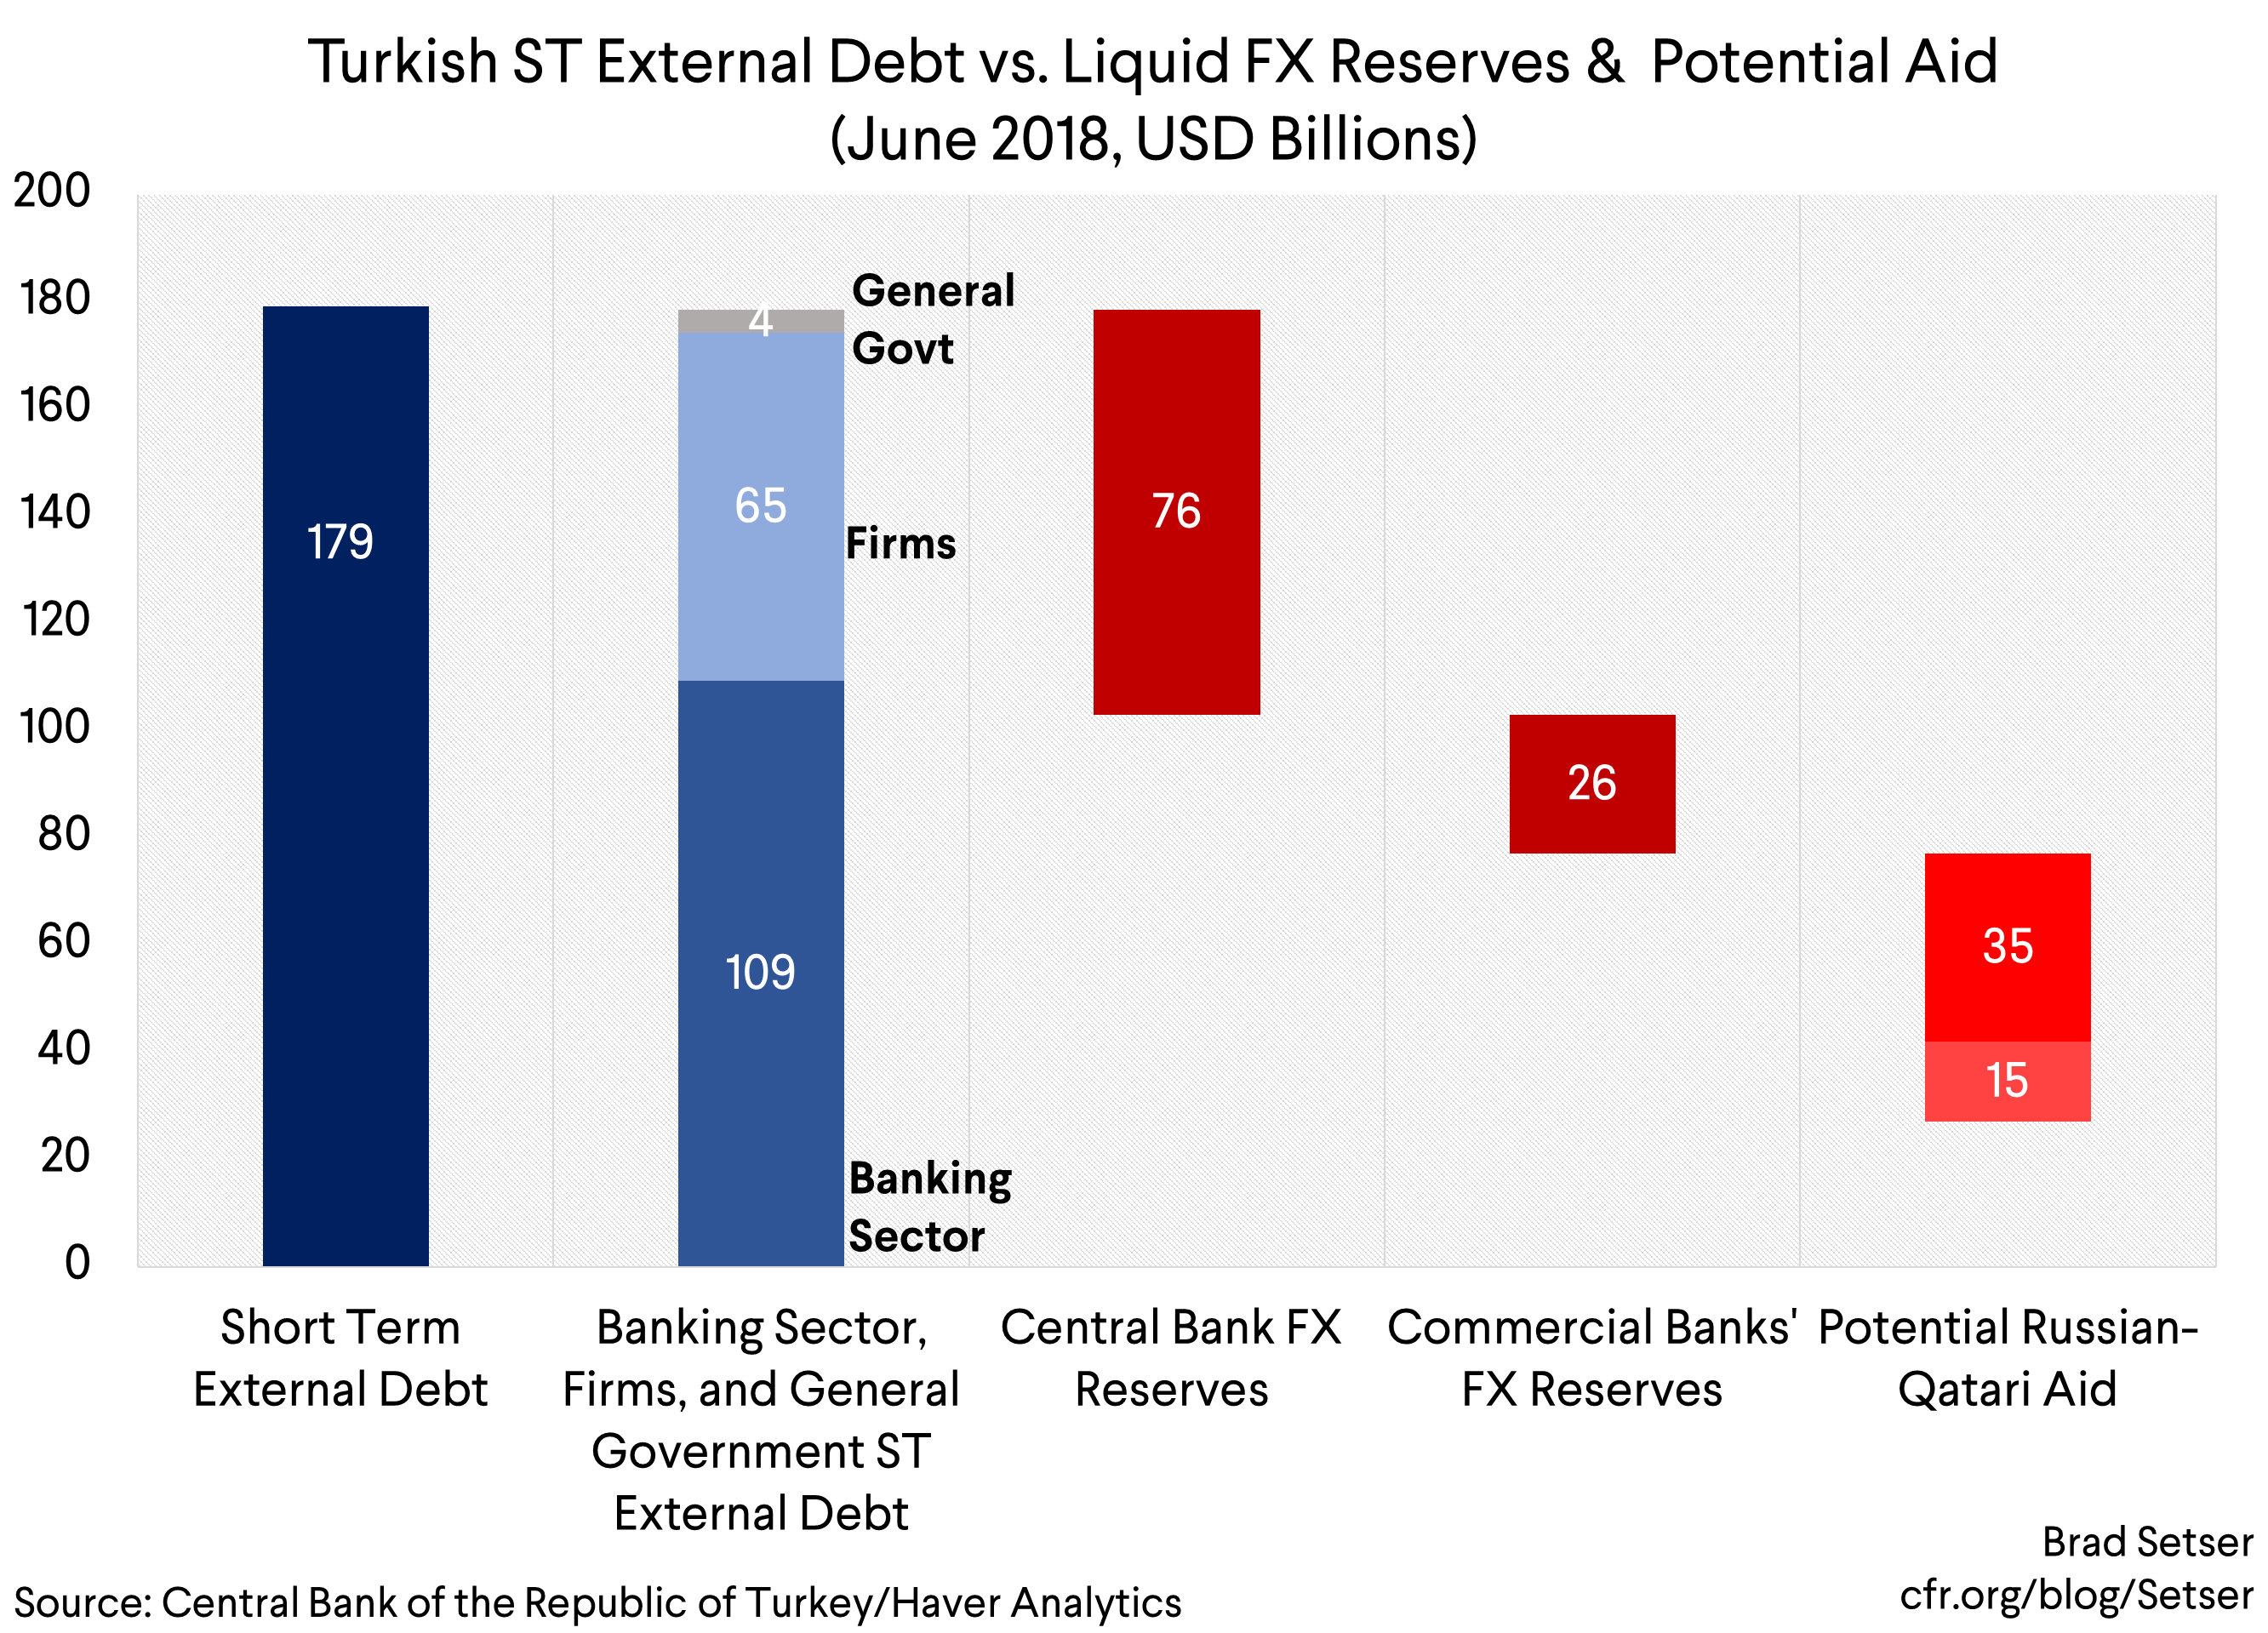 Could A Coalition of the “Friends of Turkey” Ride to Turkey’s Financial Rescue?